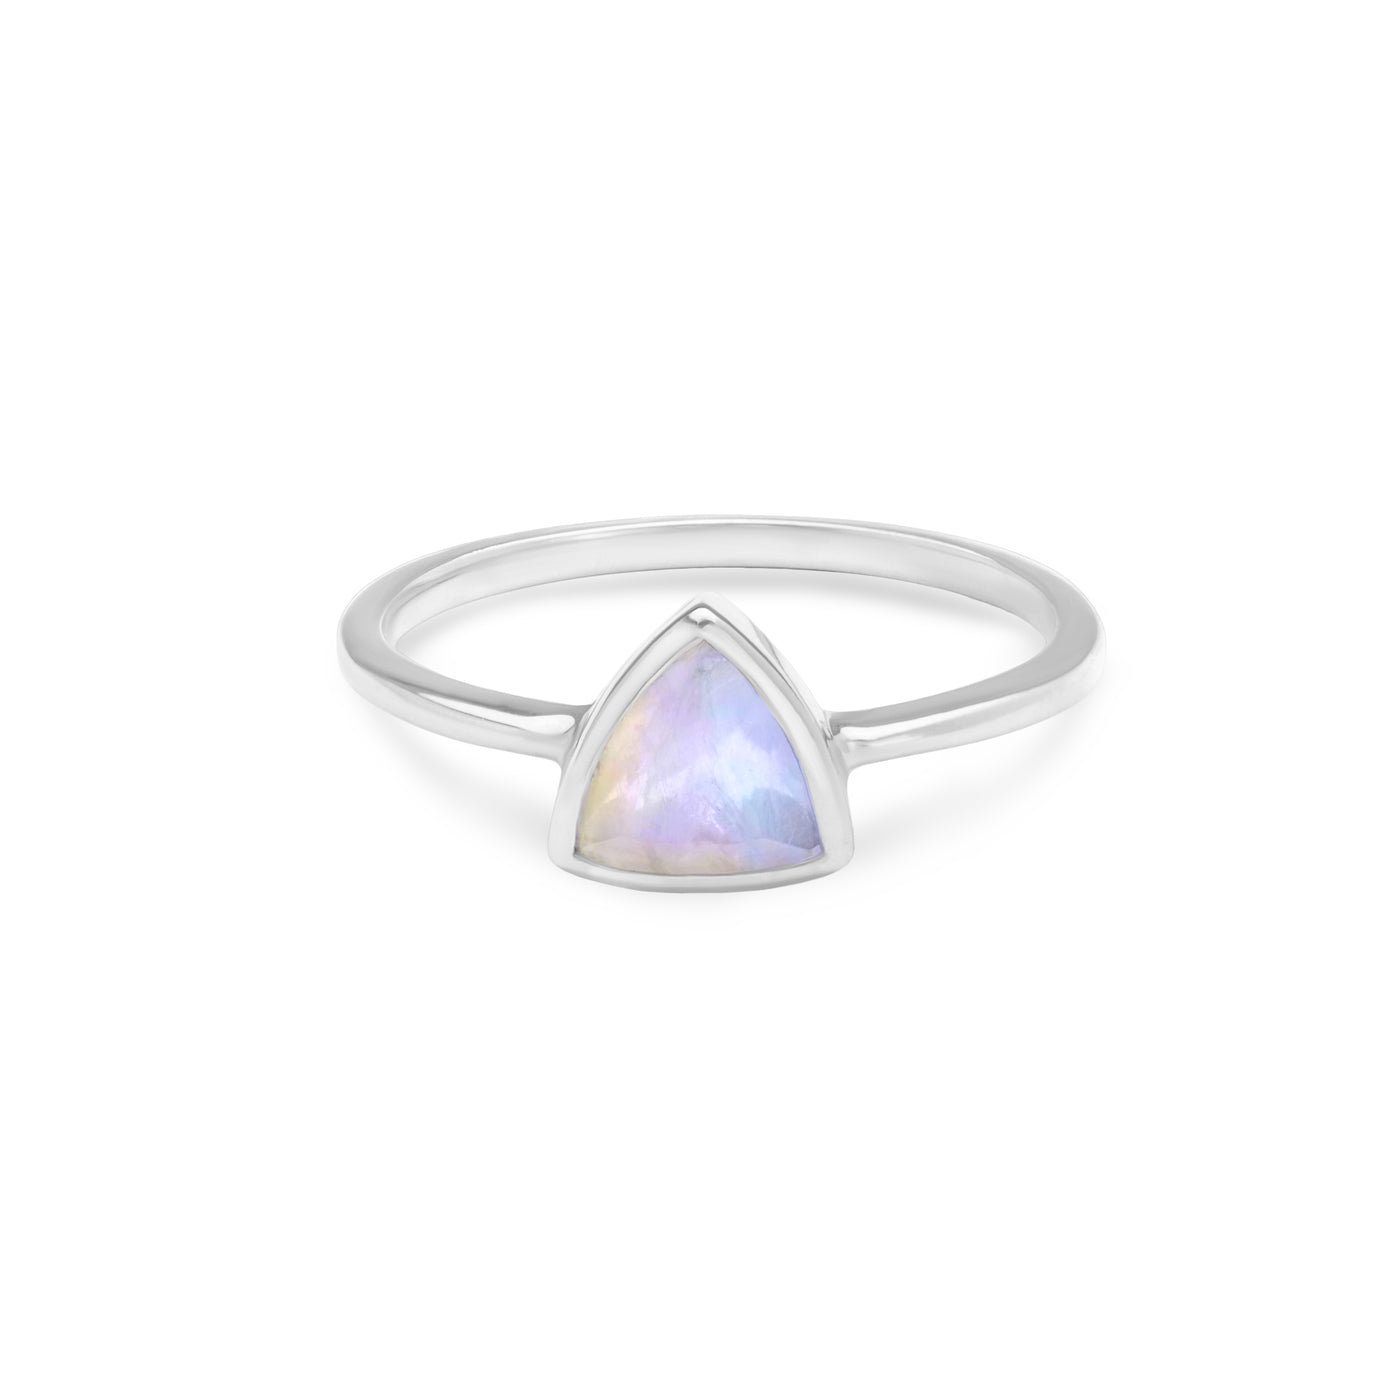 14k White Gold Ring with Moonstone in Triangle Shape laying Flat on White Background